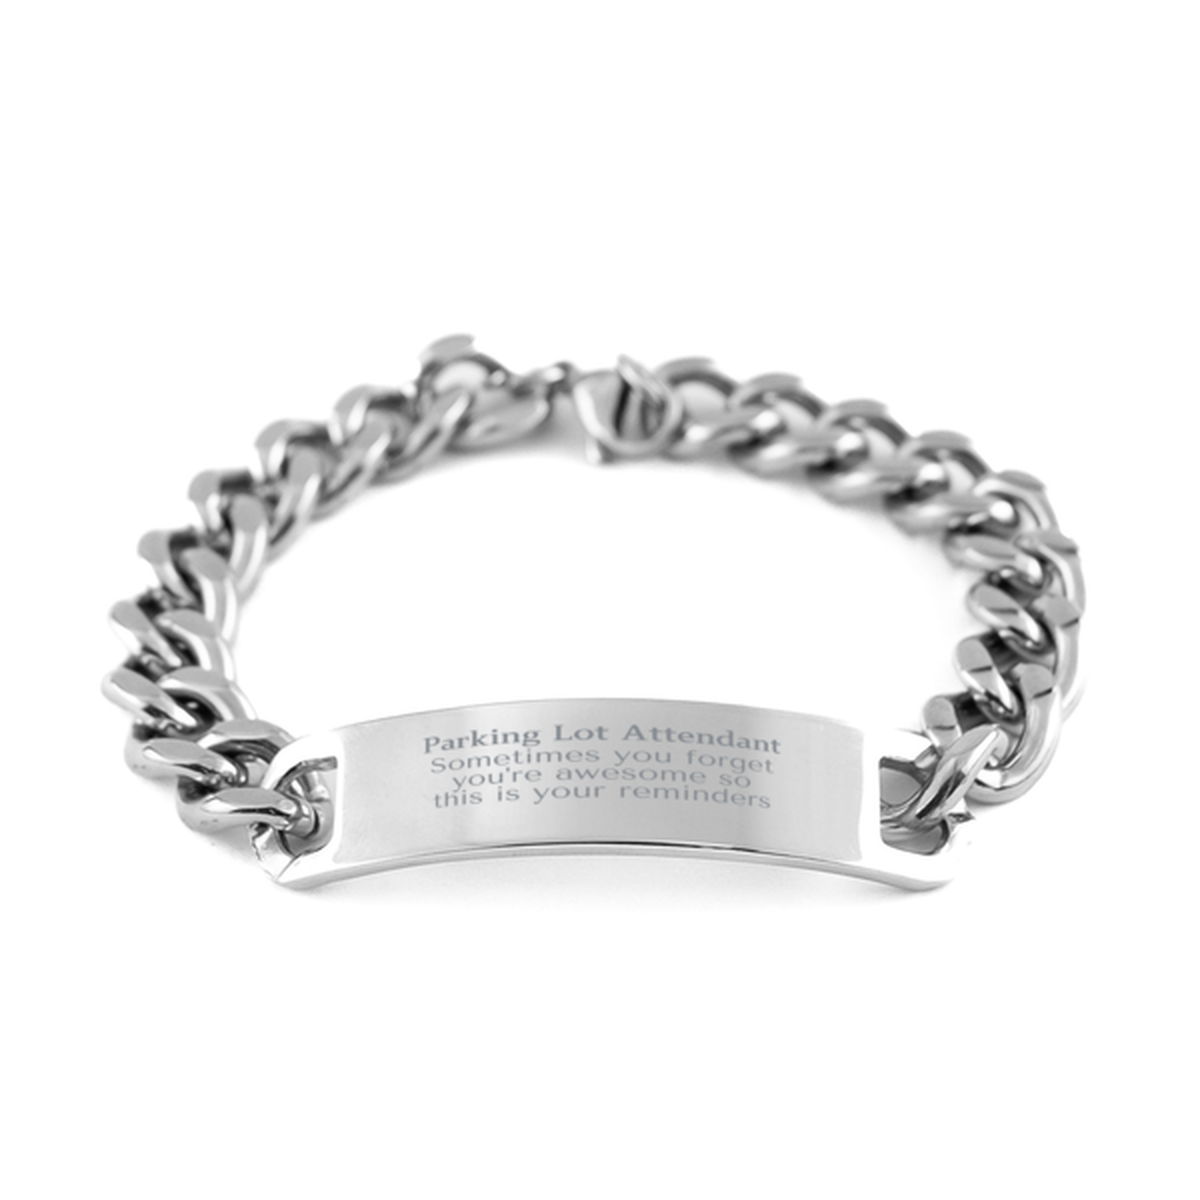 Sentimental Parking Lot Attendant Cuban Chain Stainless Steel Bracelet, Parking Lot Attendant Sometimes you forget you're awesome so this is your reminders, Graduation Christmas Birthday Gifts for Parking Lot Attendant, Men, Women, Coworkers